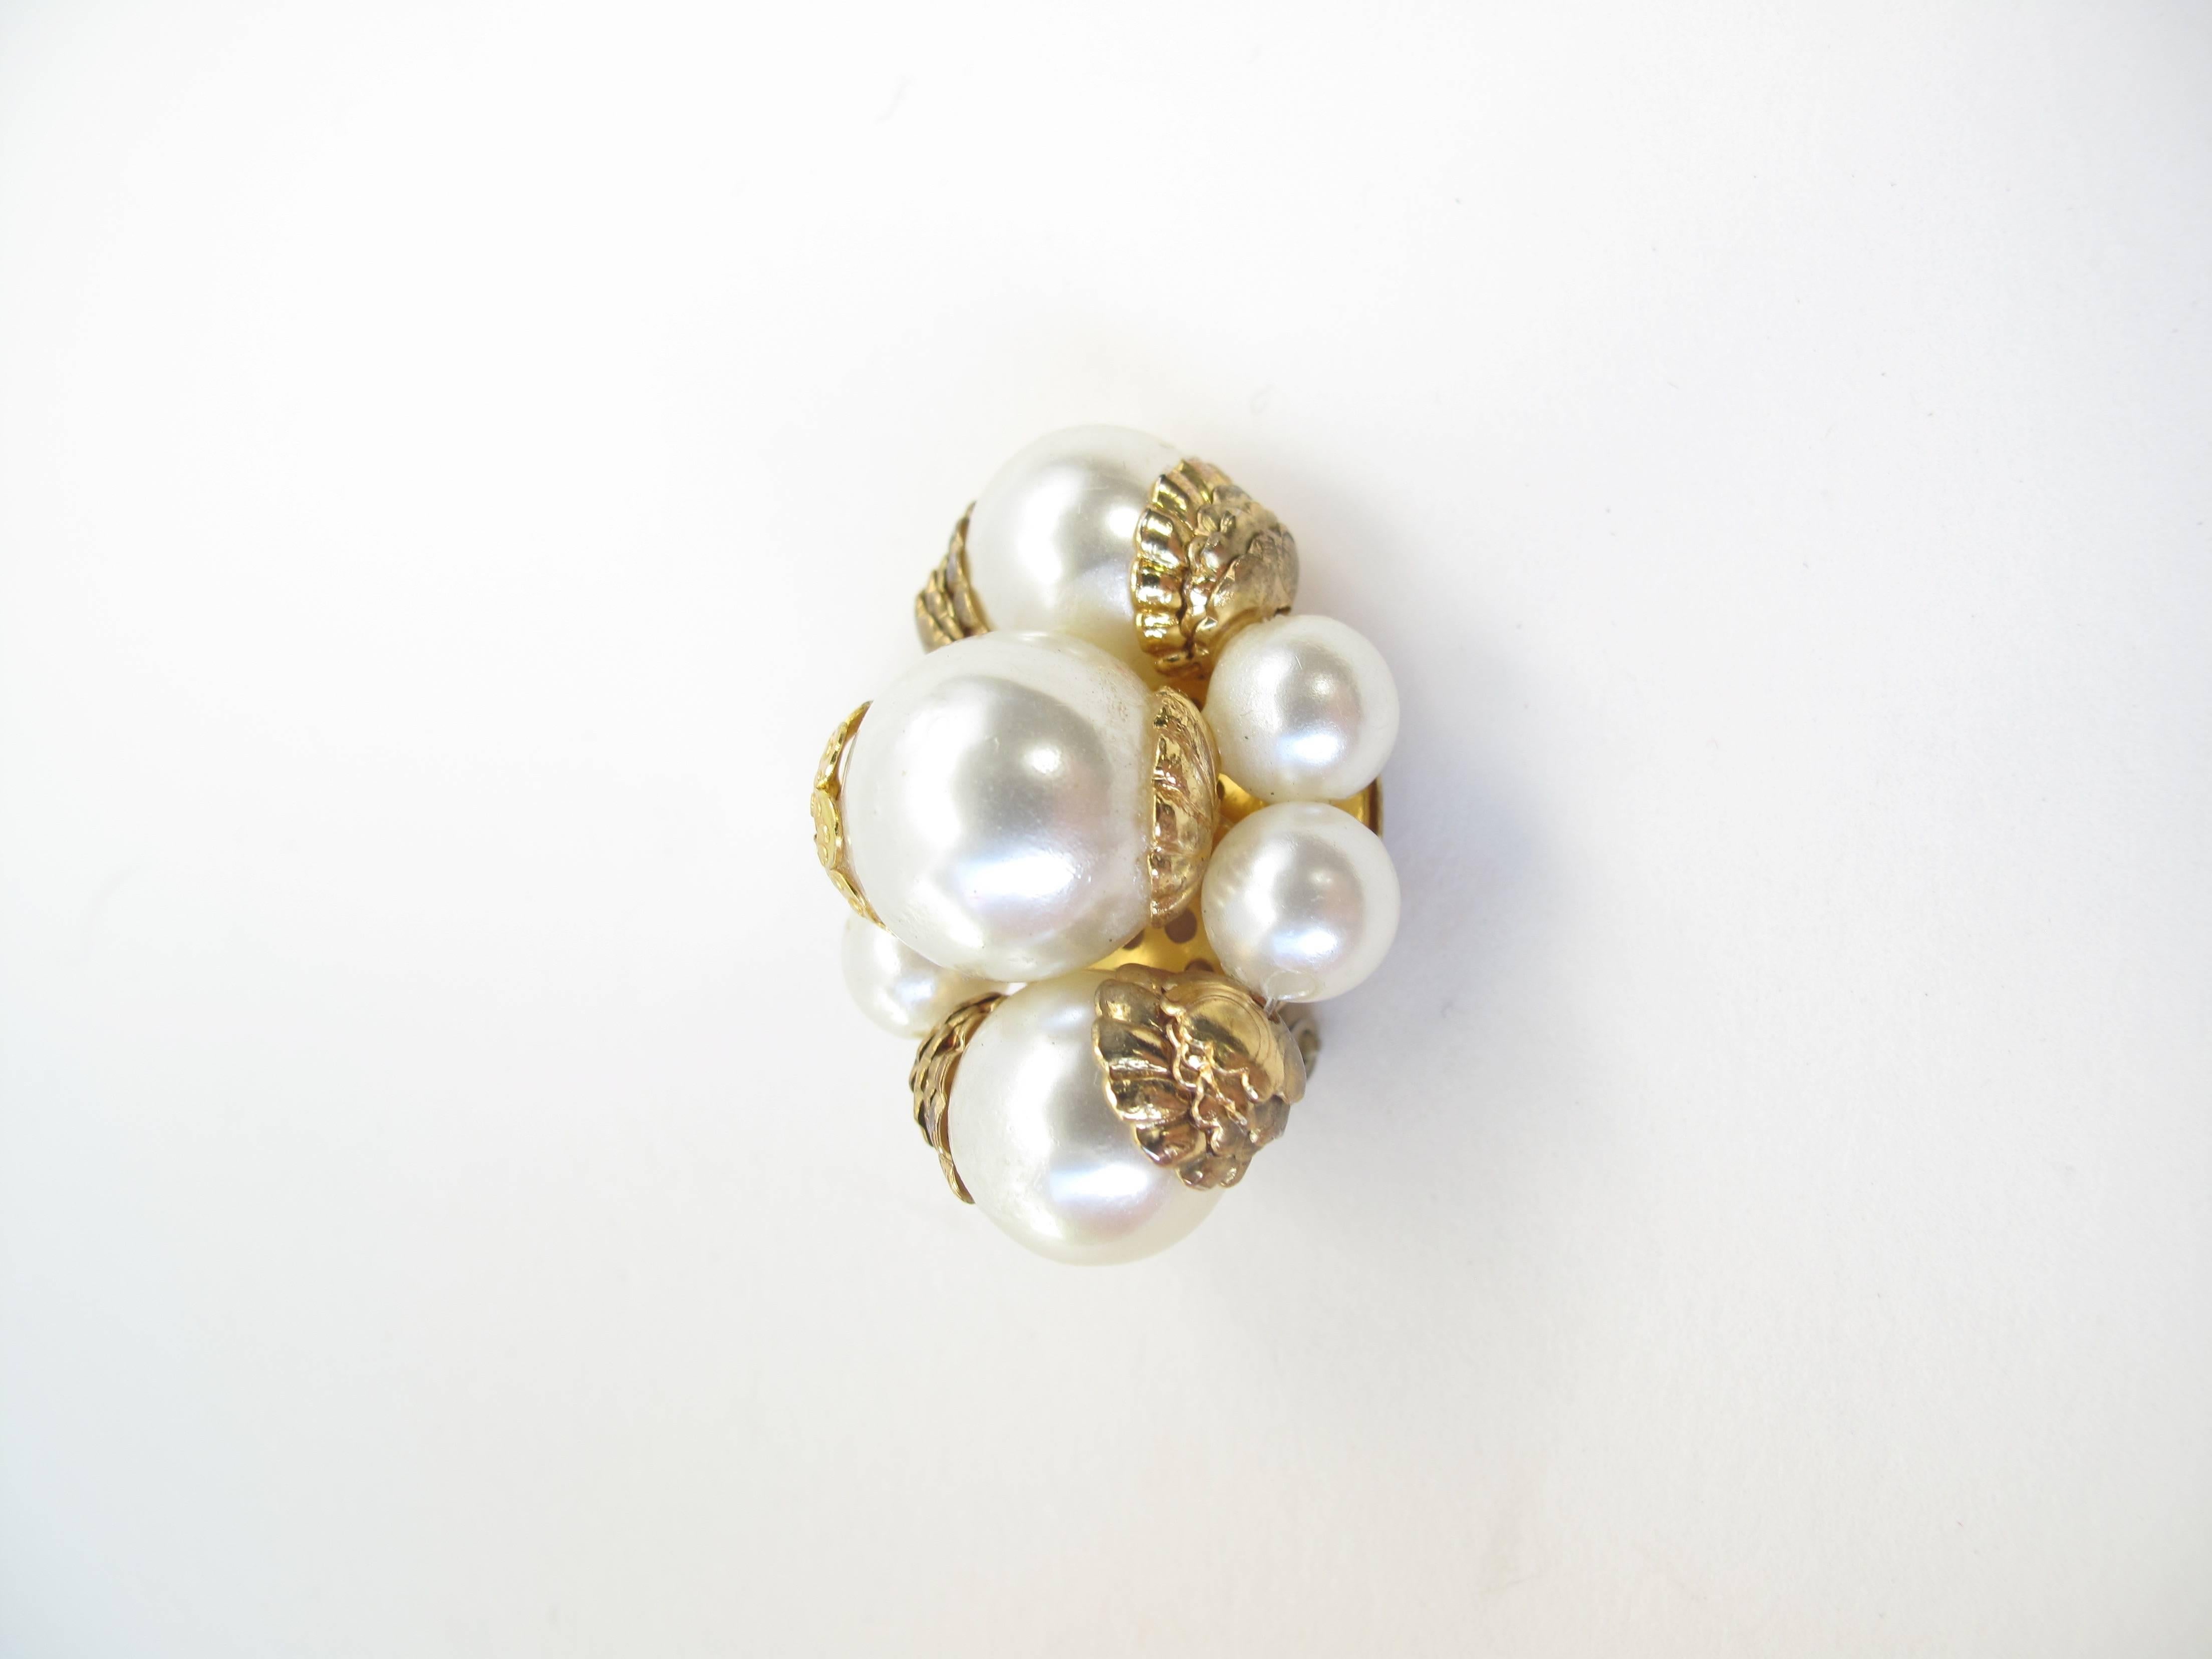 Castlecliff faux pearl clip on earrings.  Condition: Good, tarnish

We accept returns for refund, please see our terms.  We offer free ground shipping within the US.  Please let us know if you have any questions. 